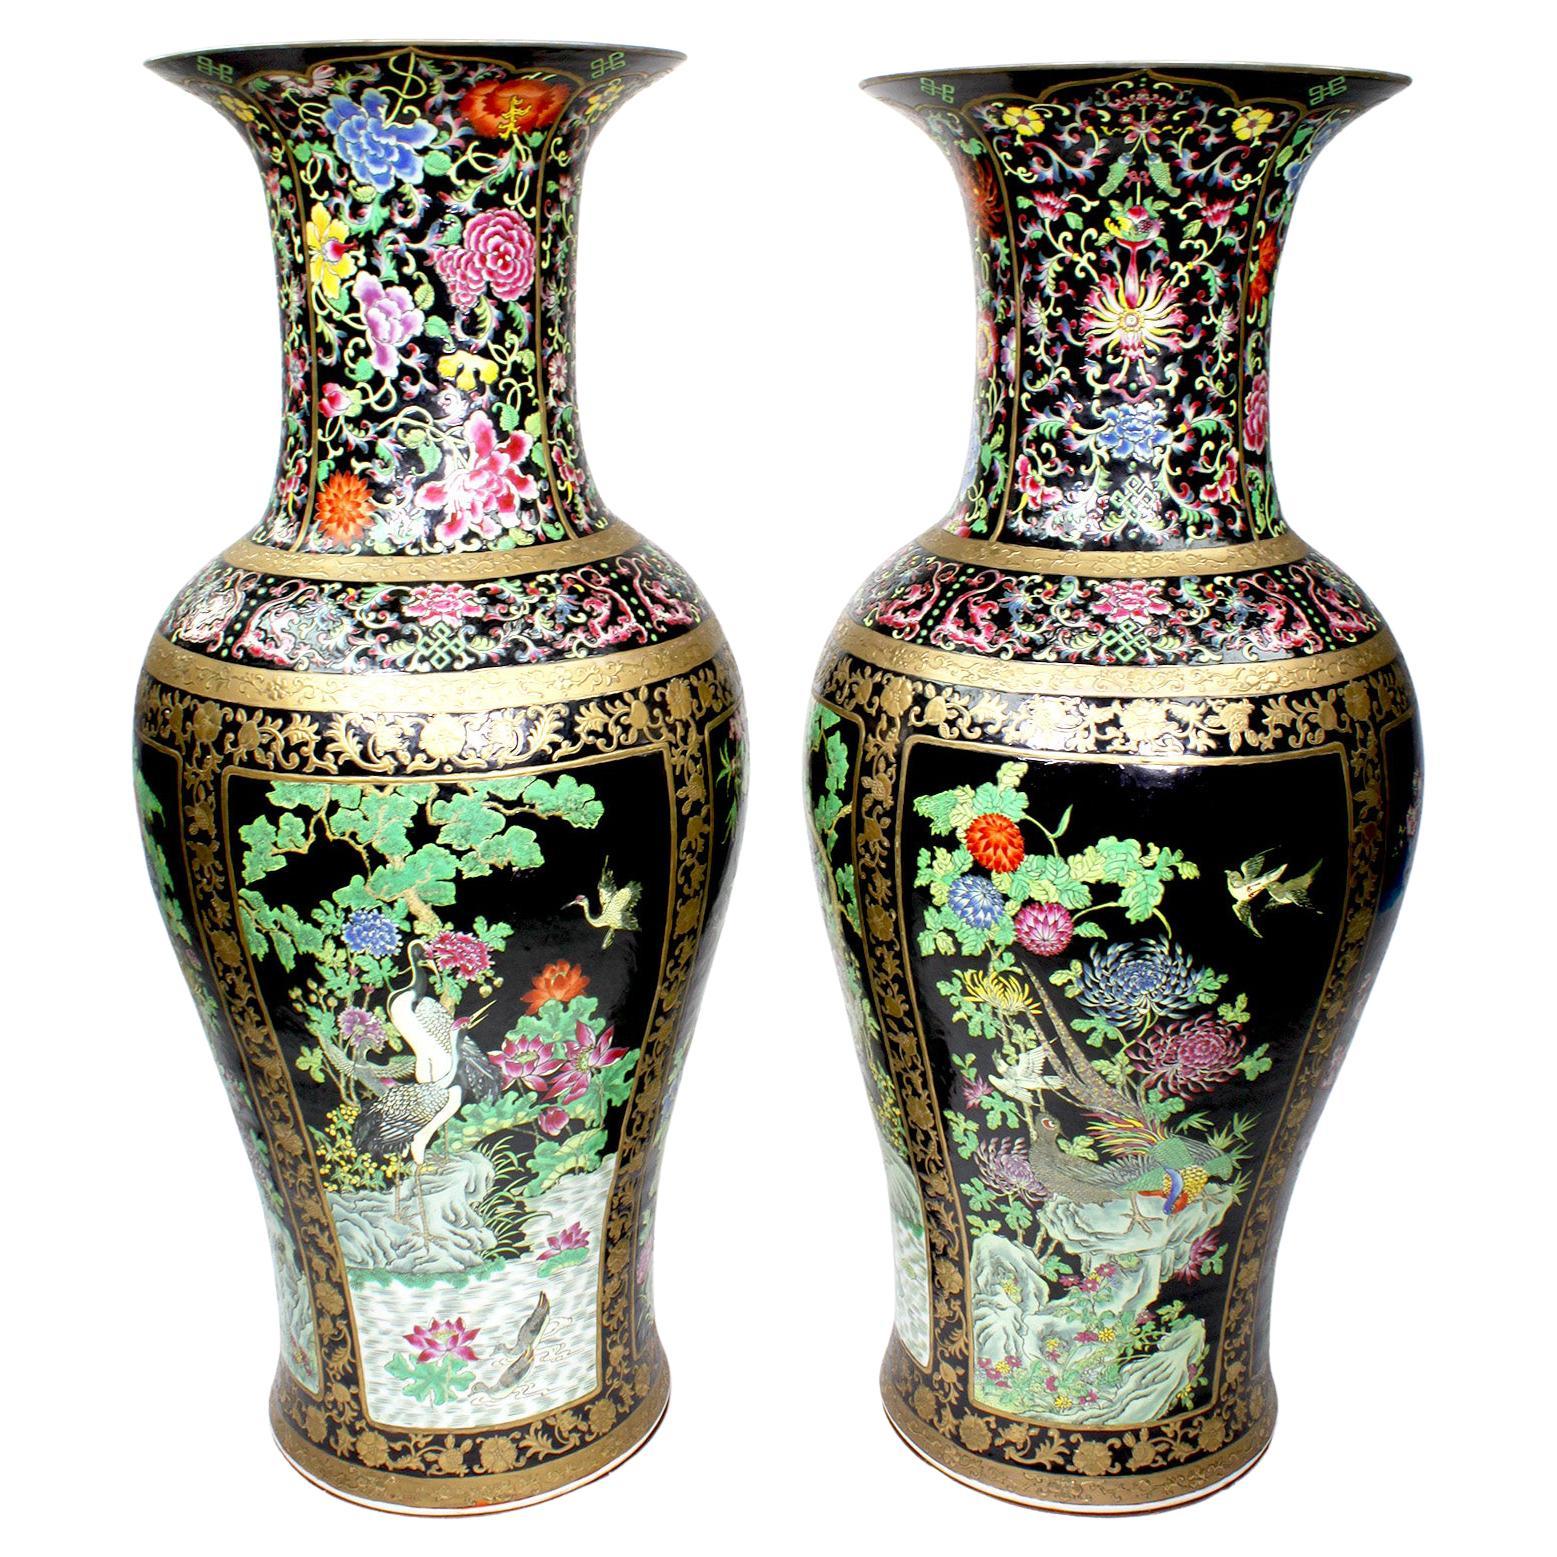 A Pair of Tall Chinese Export Porcelain Figural Vases with Birds and Flowers